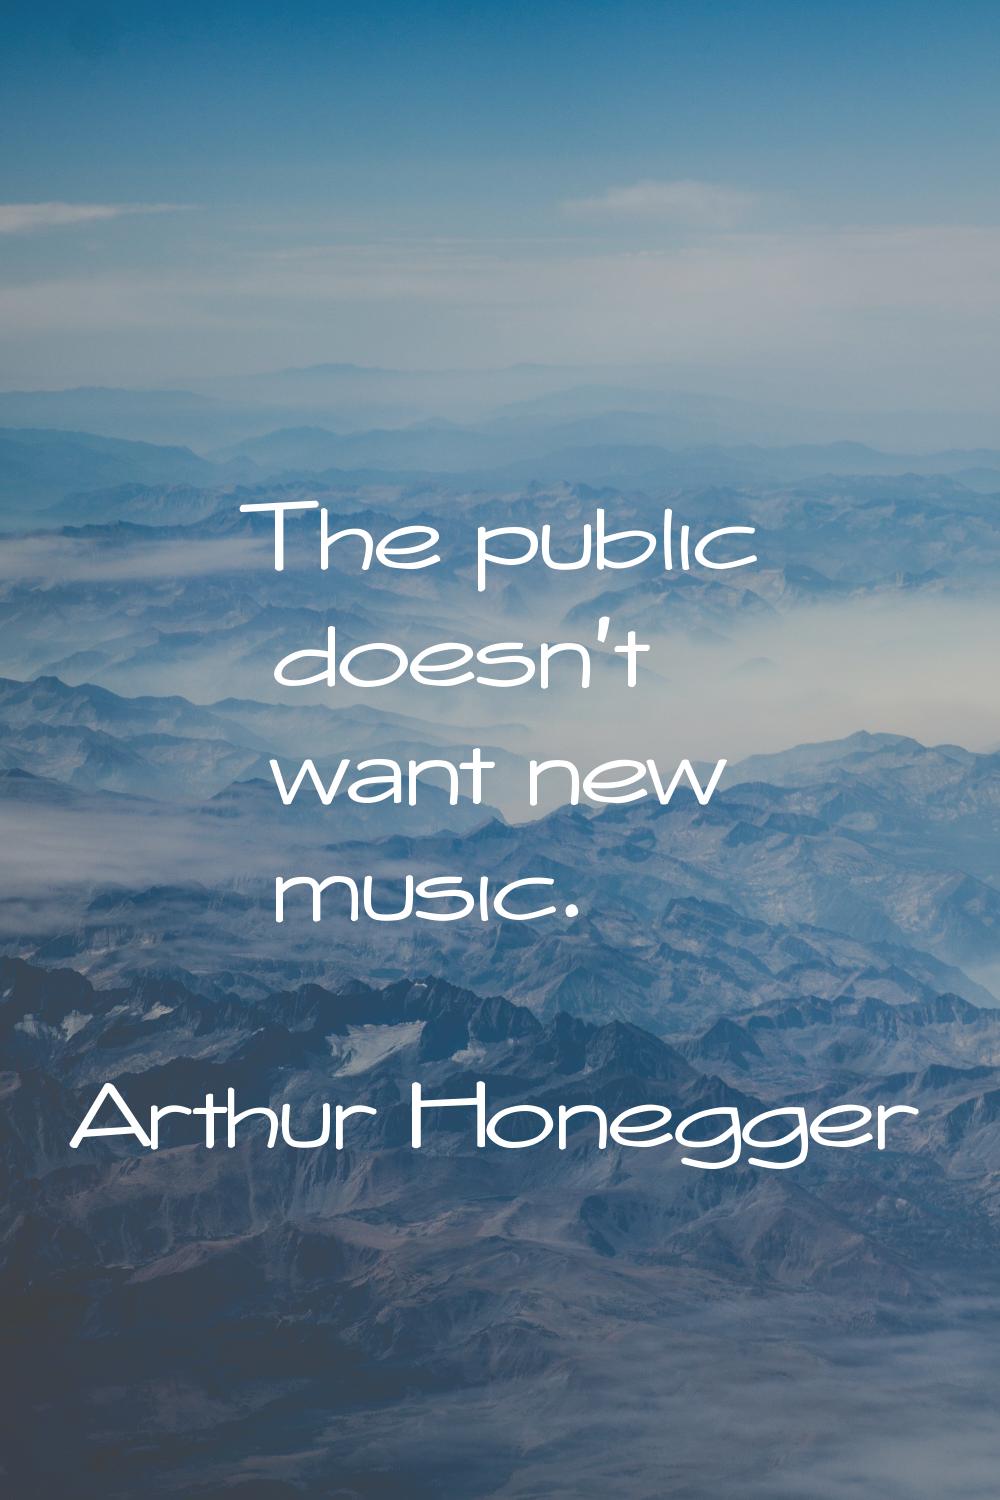 The public doesn't want new music.